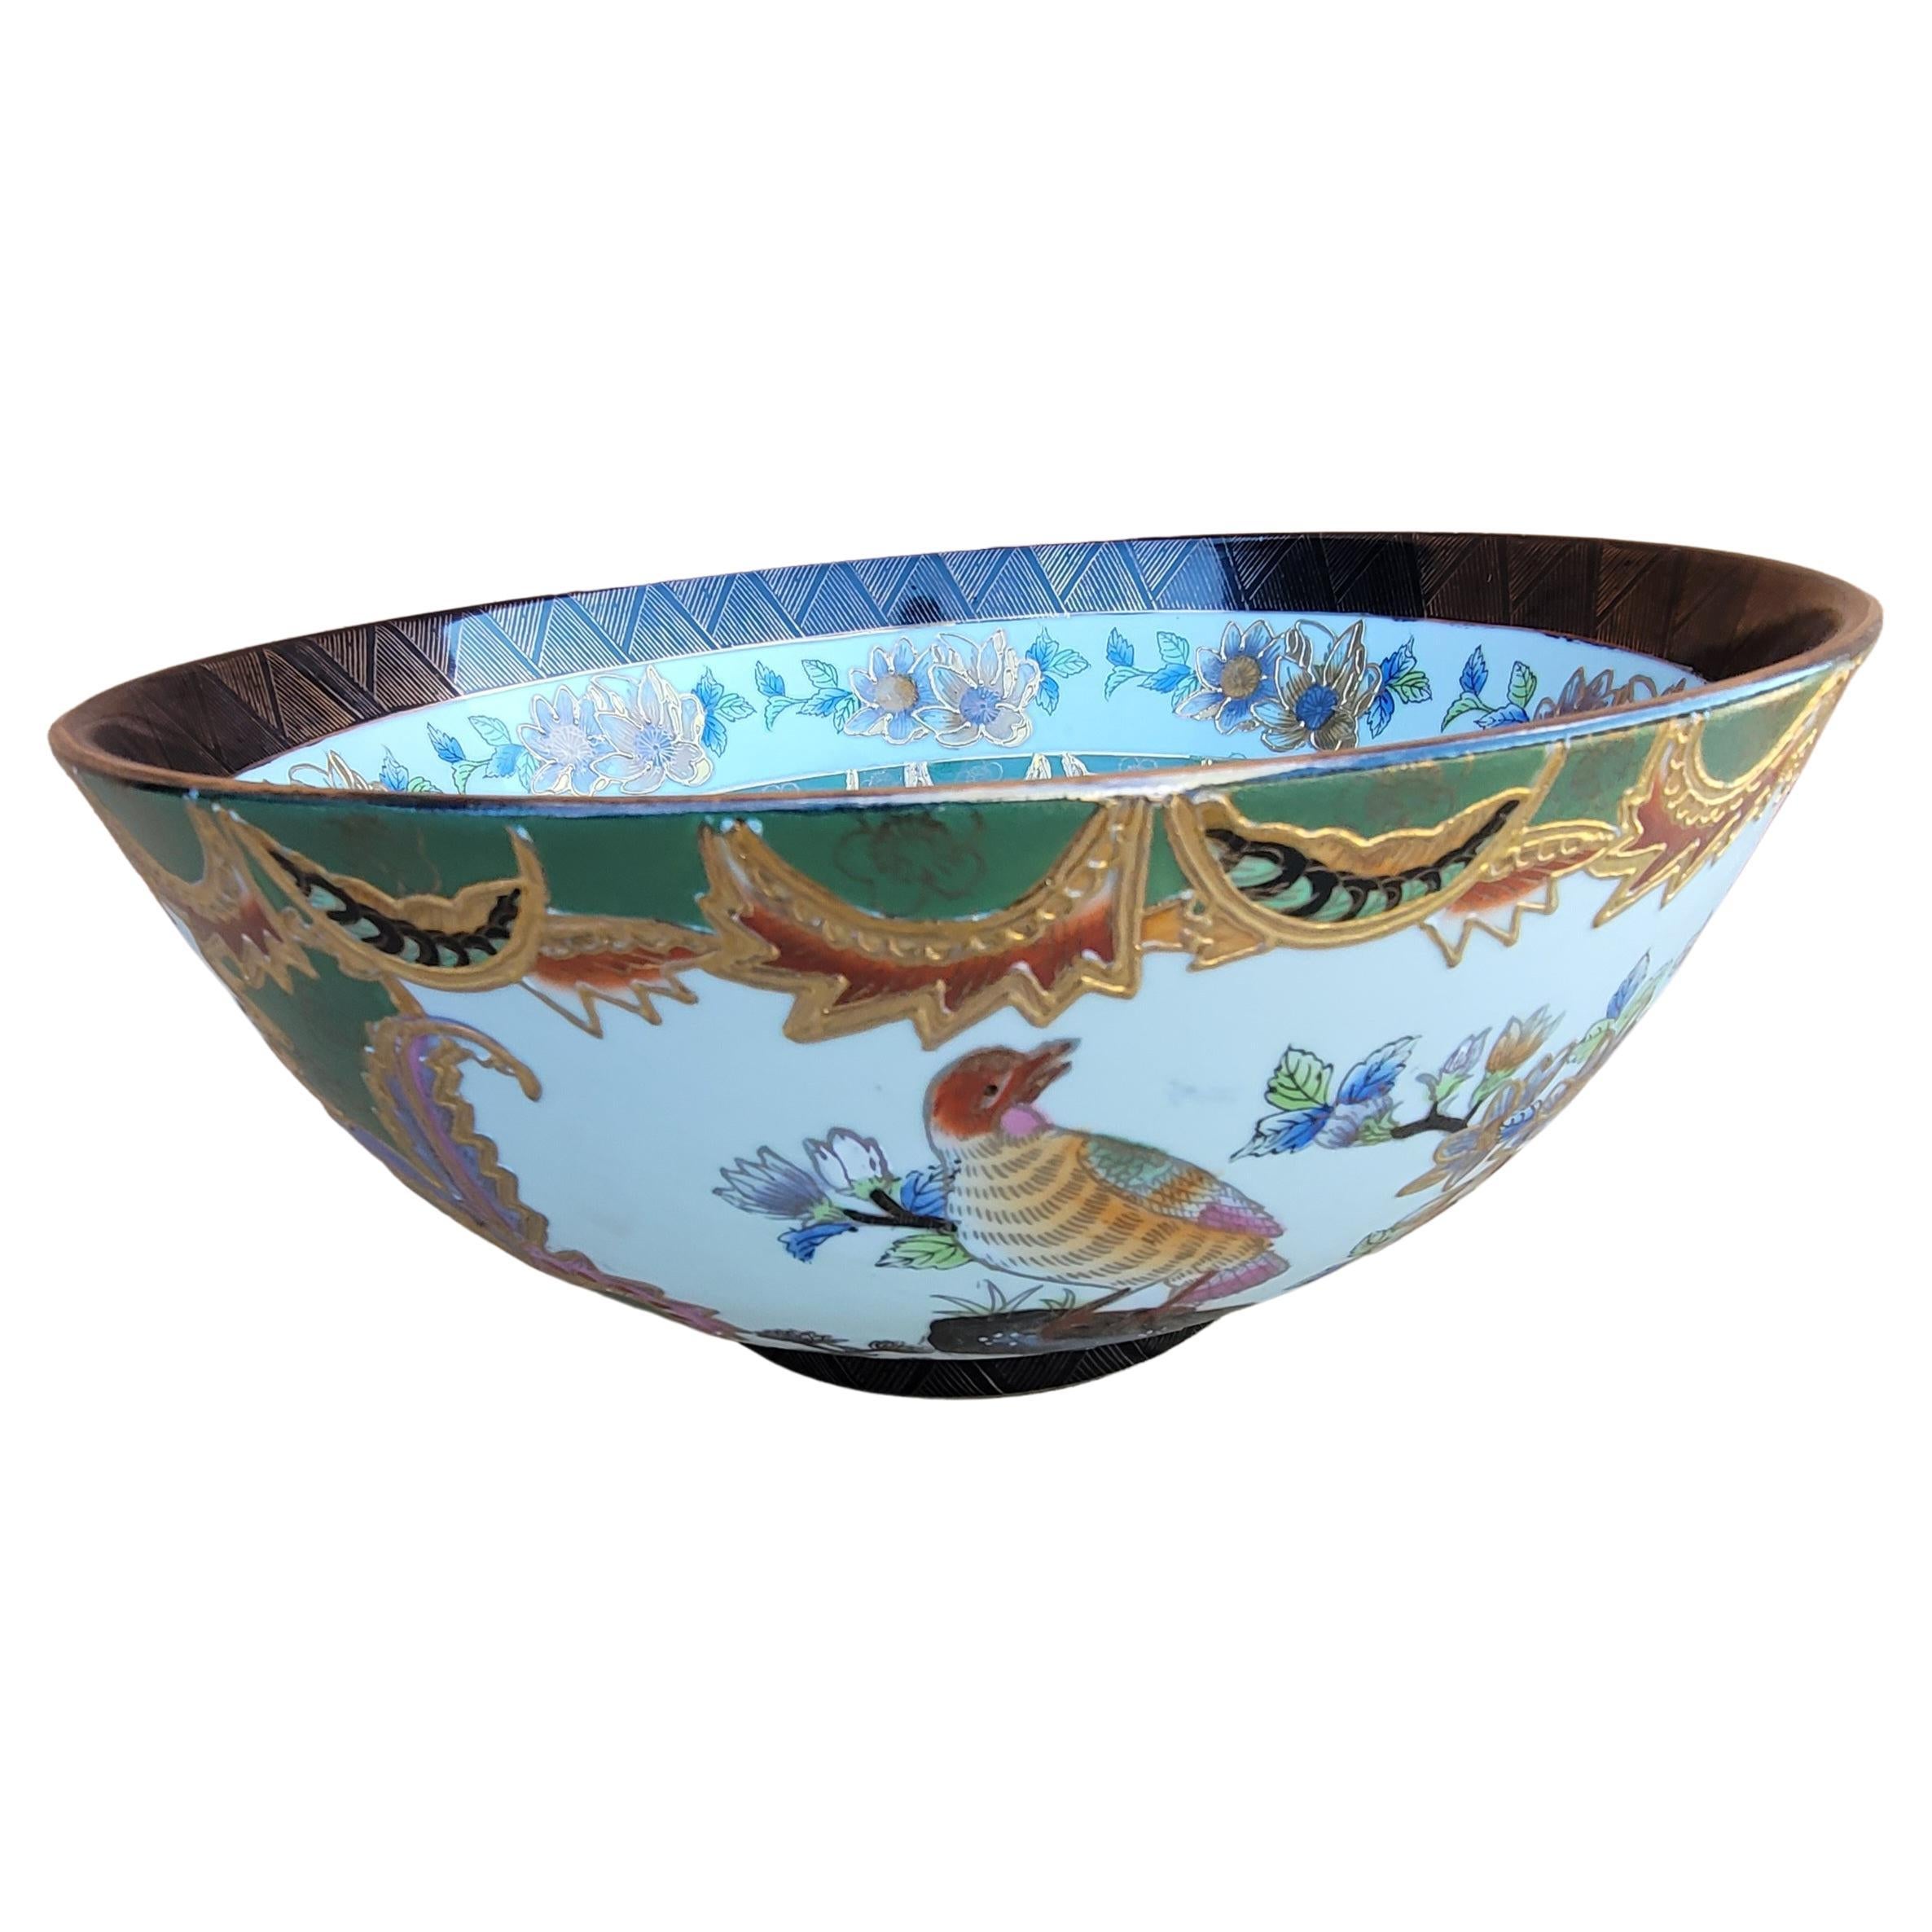 Large Hand-Painted Chinese Enamel And Gilt Decorated Porcelain Bowl